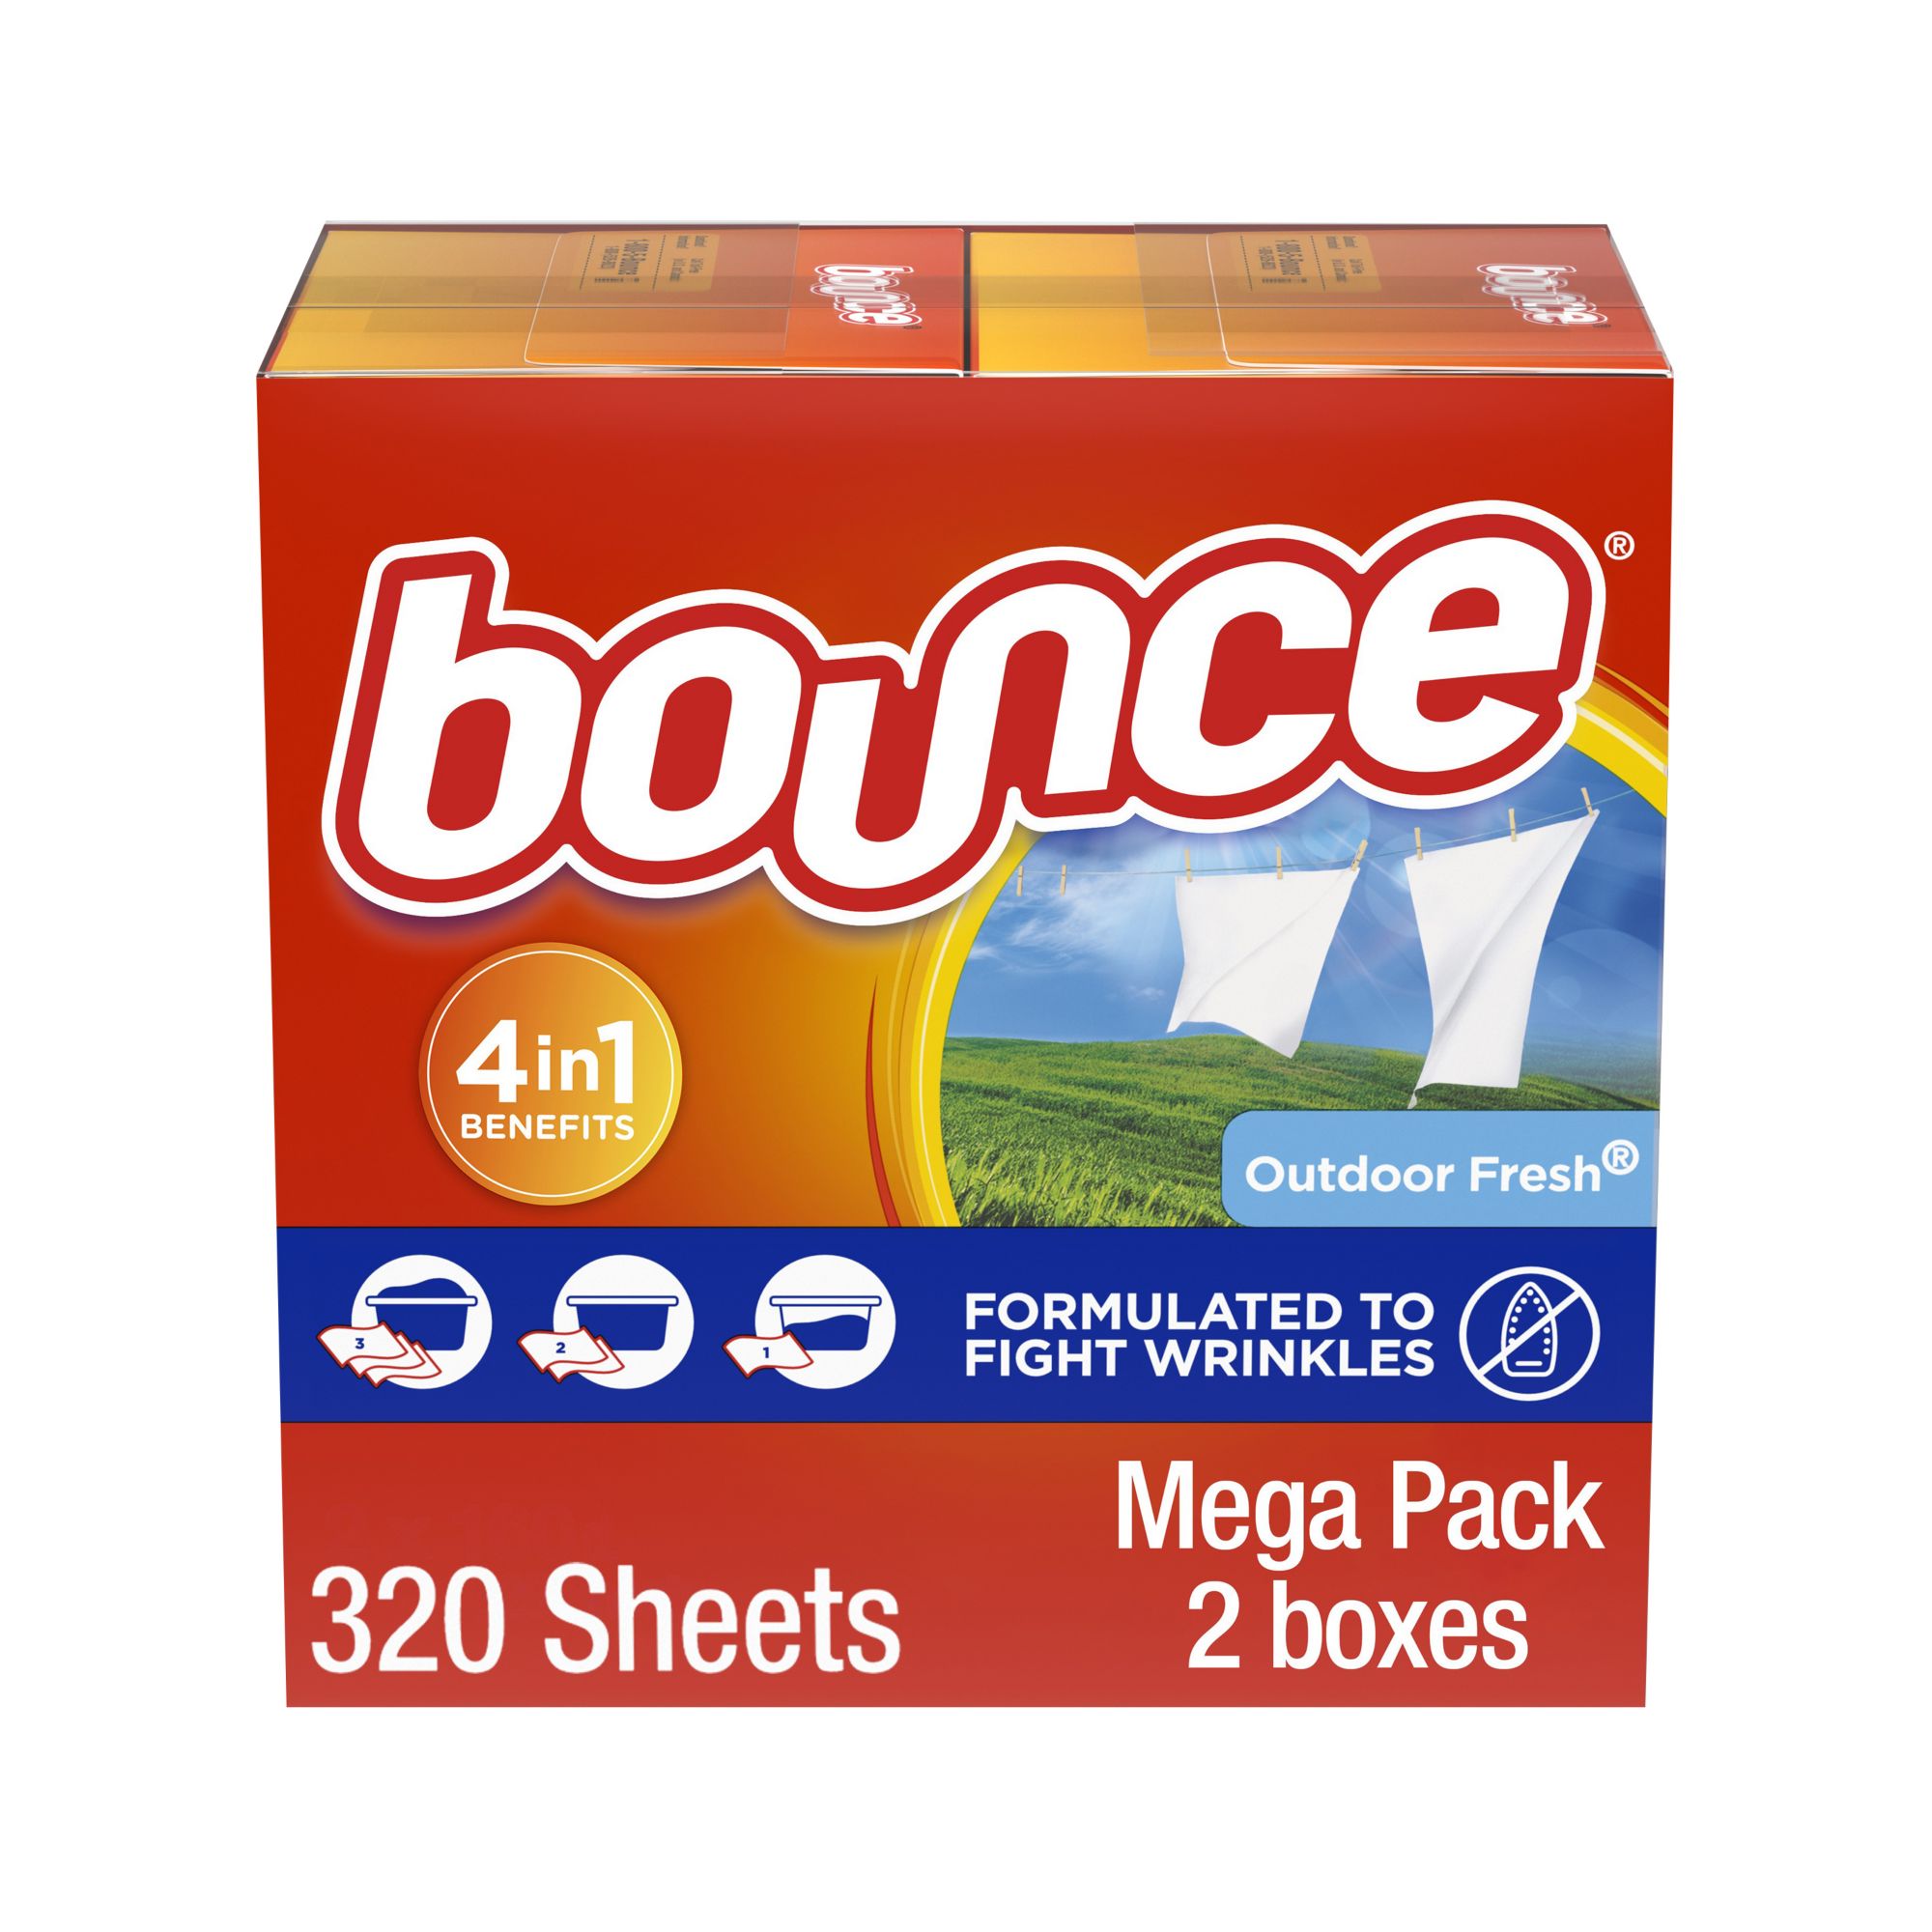 How Many Dryer Sheets Should You Use Per Load?